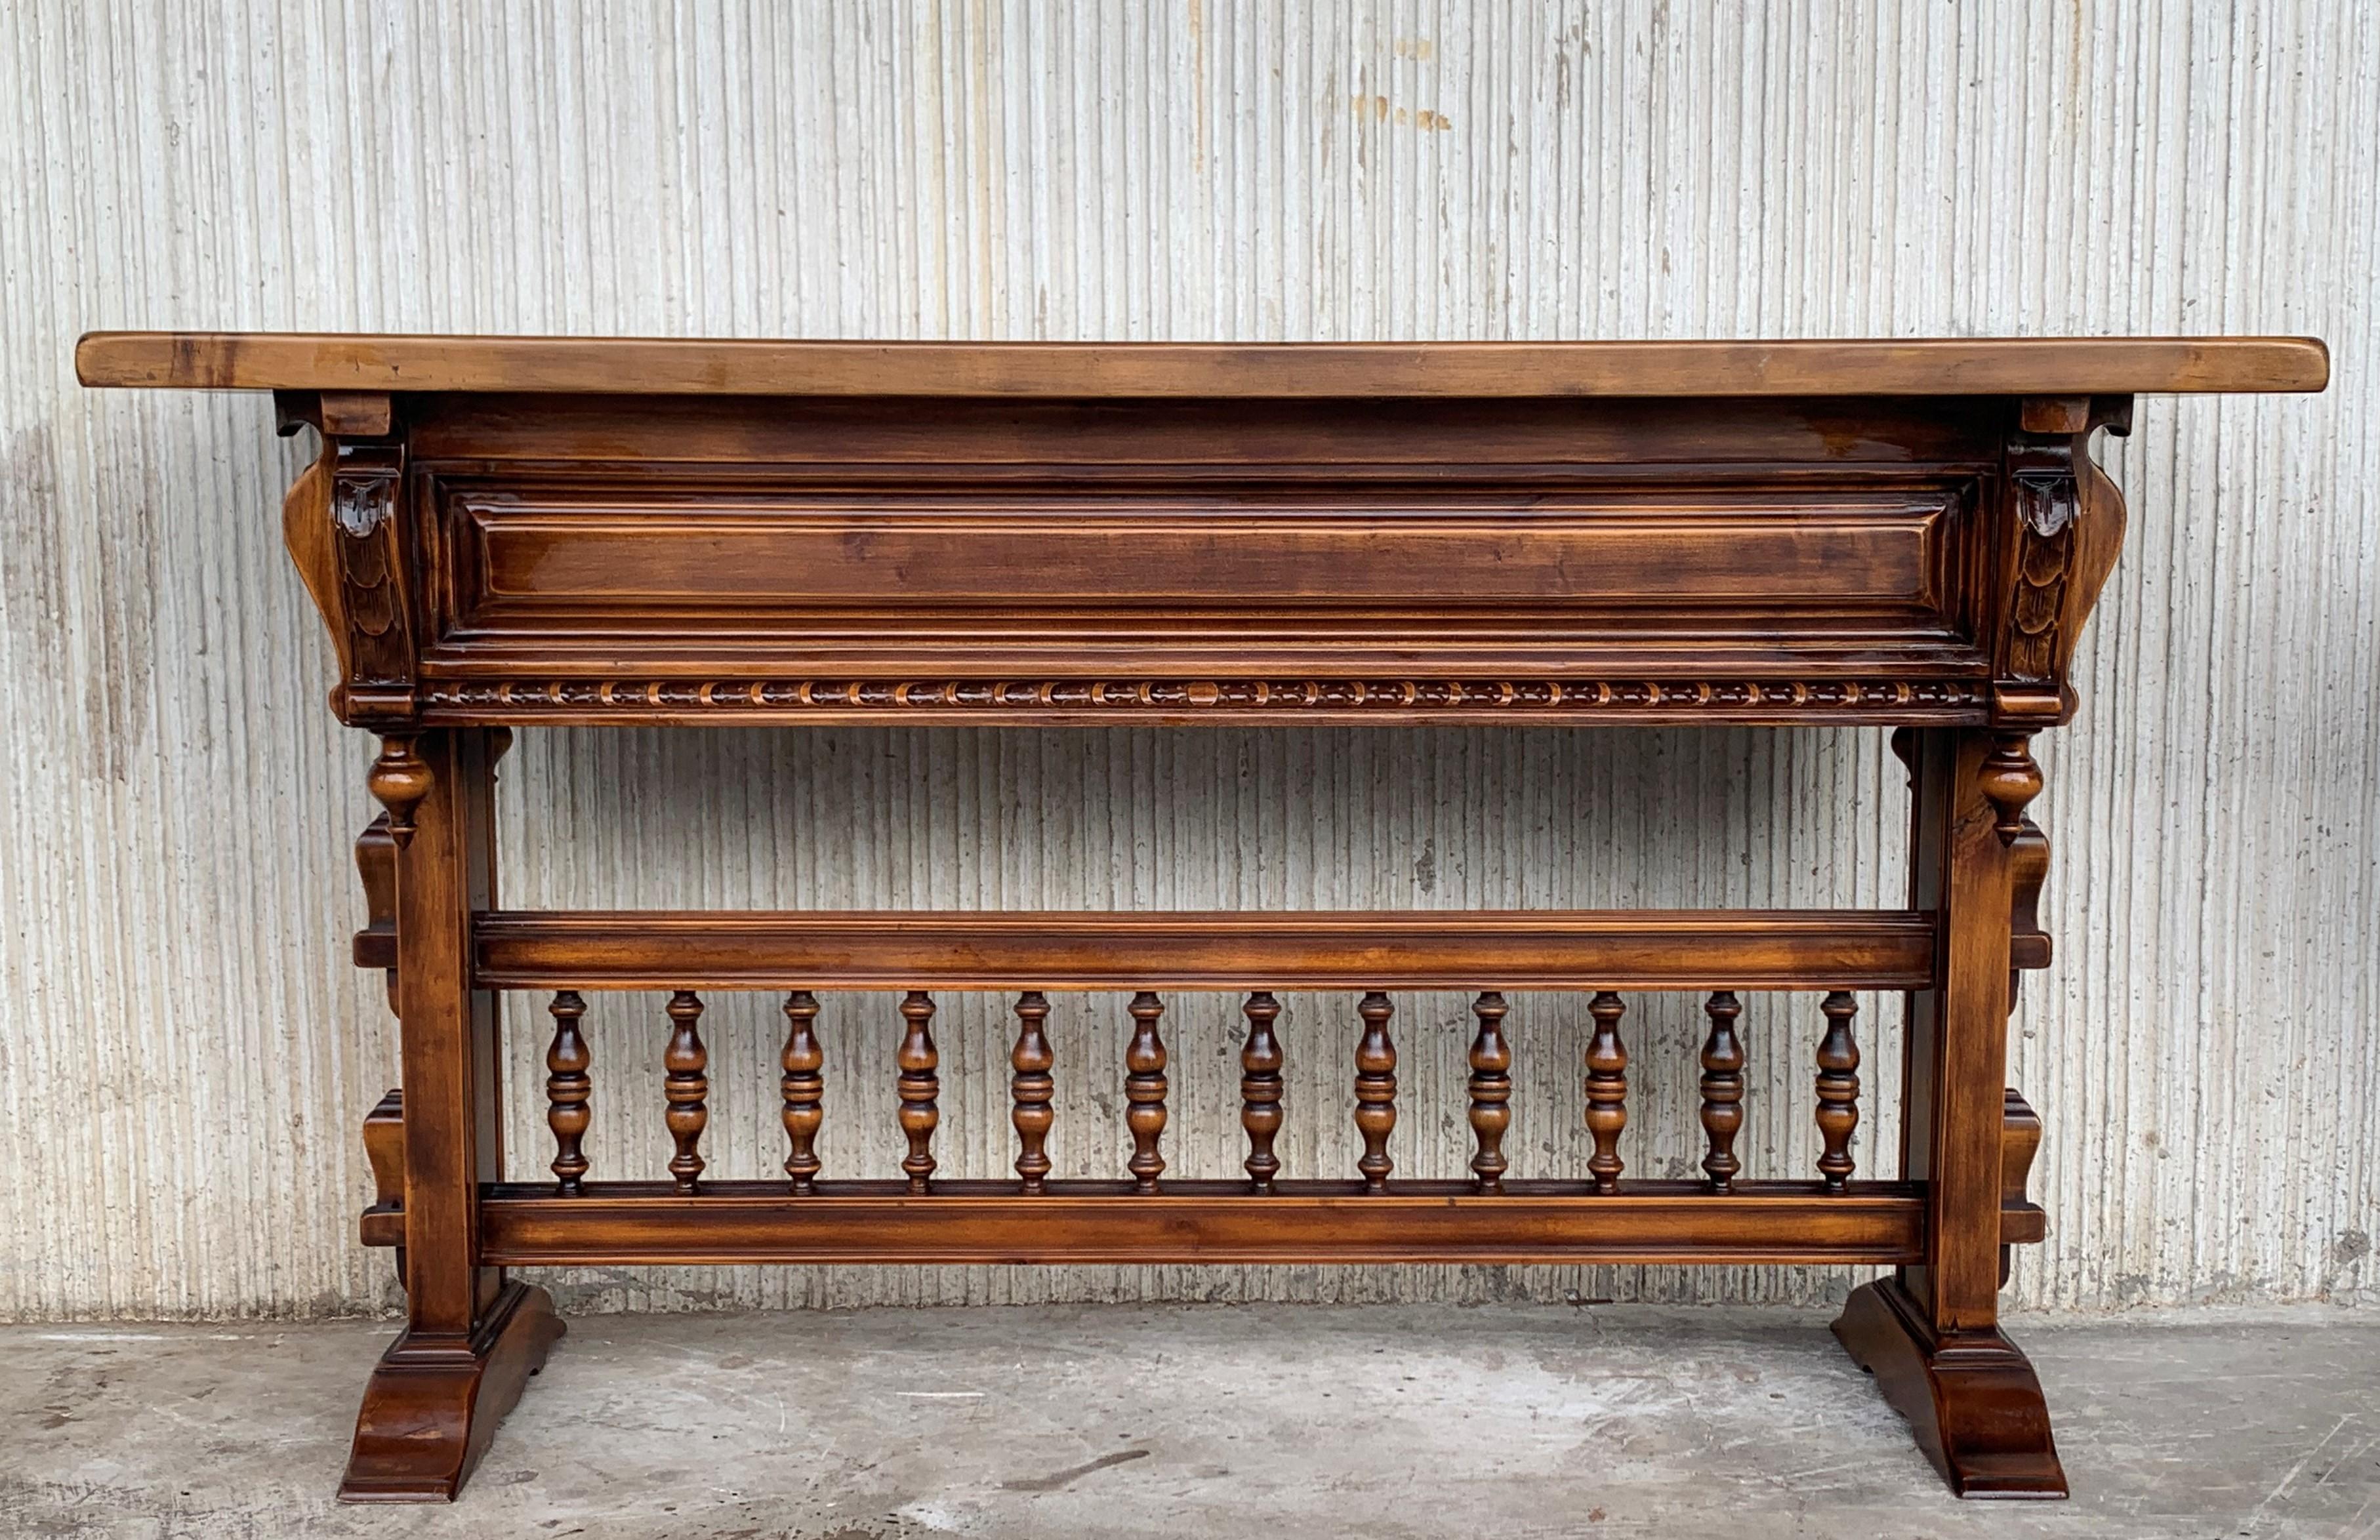 18th century Spanish Baroque console table in walnut with three carved drawers and stretcher.